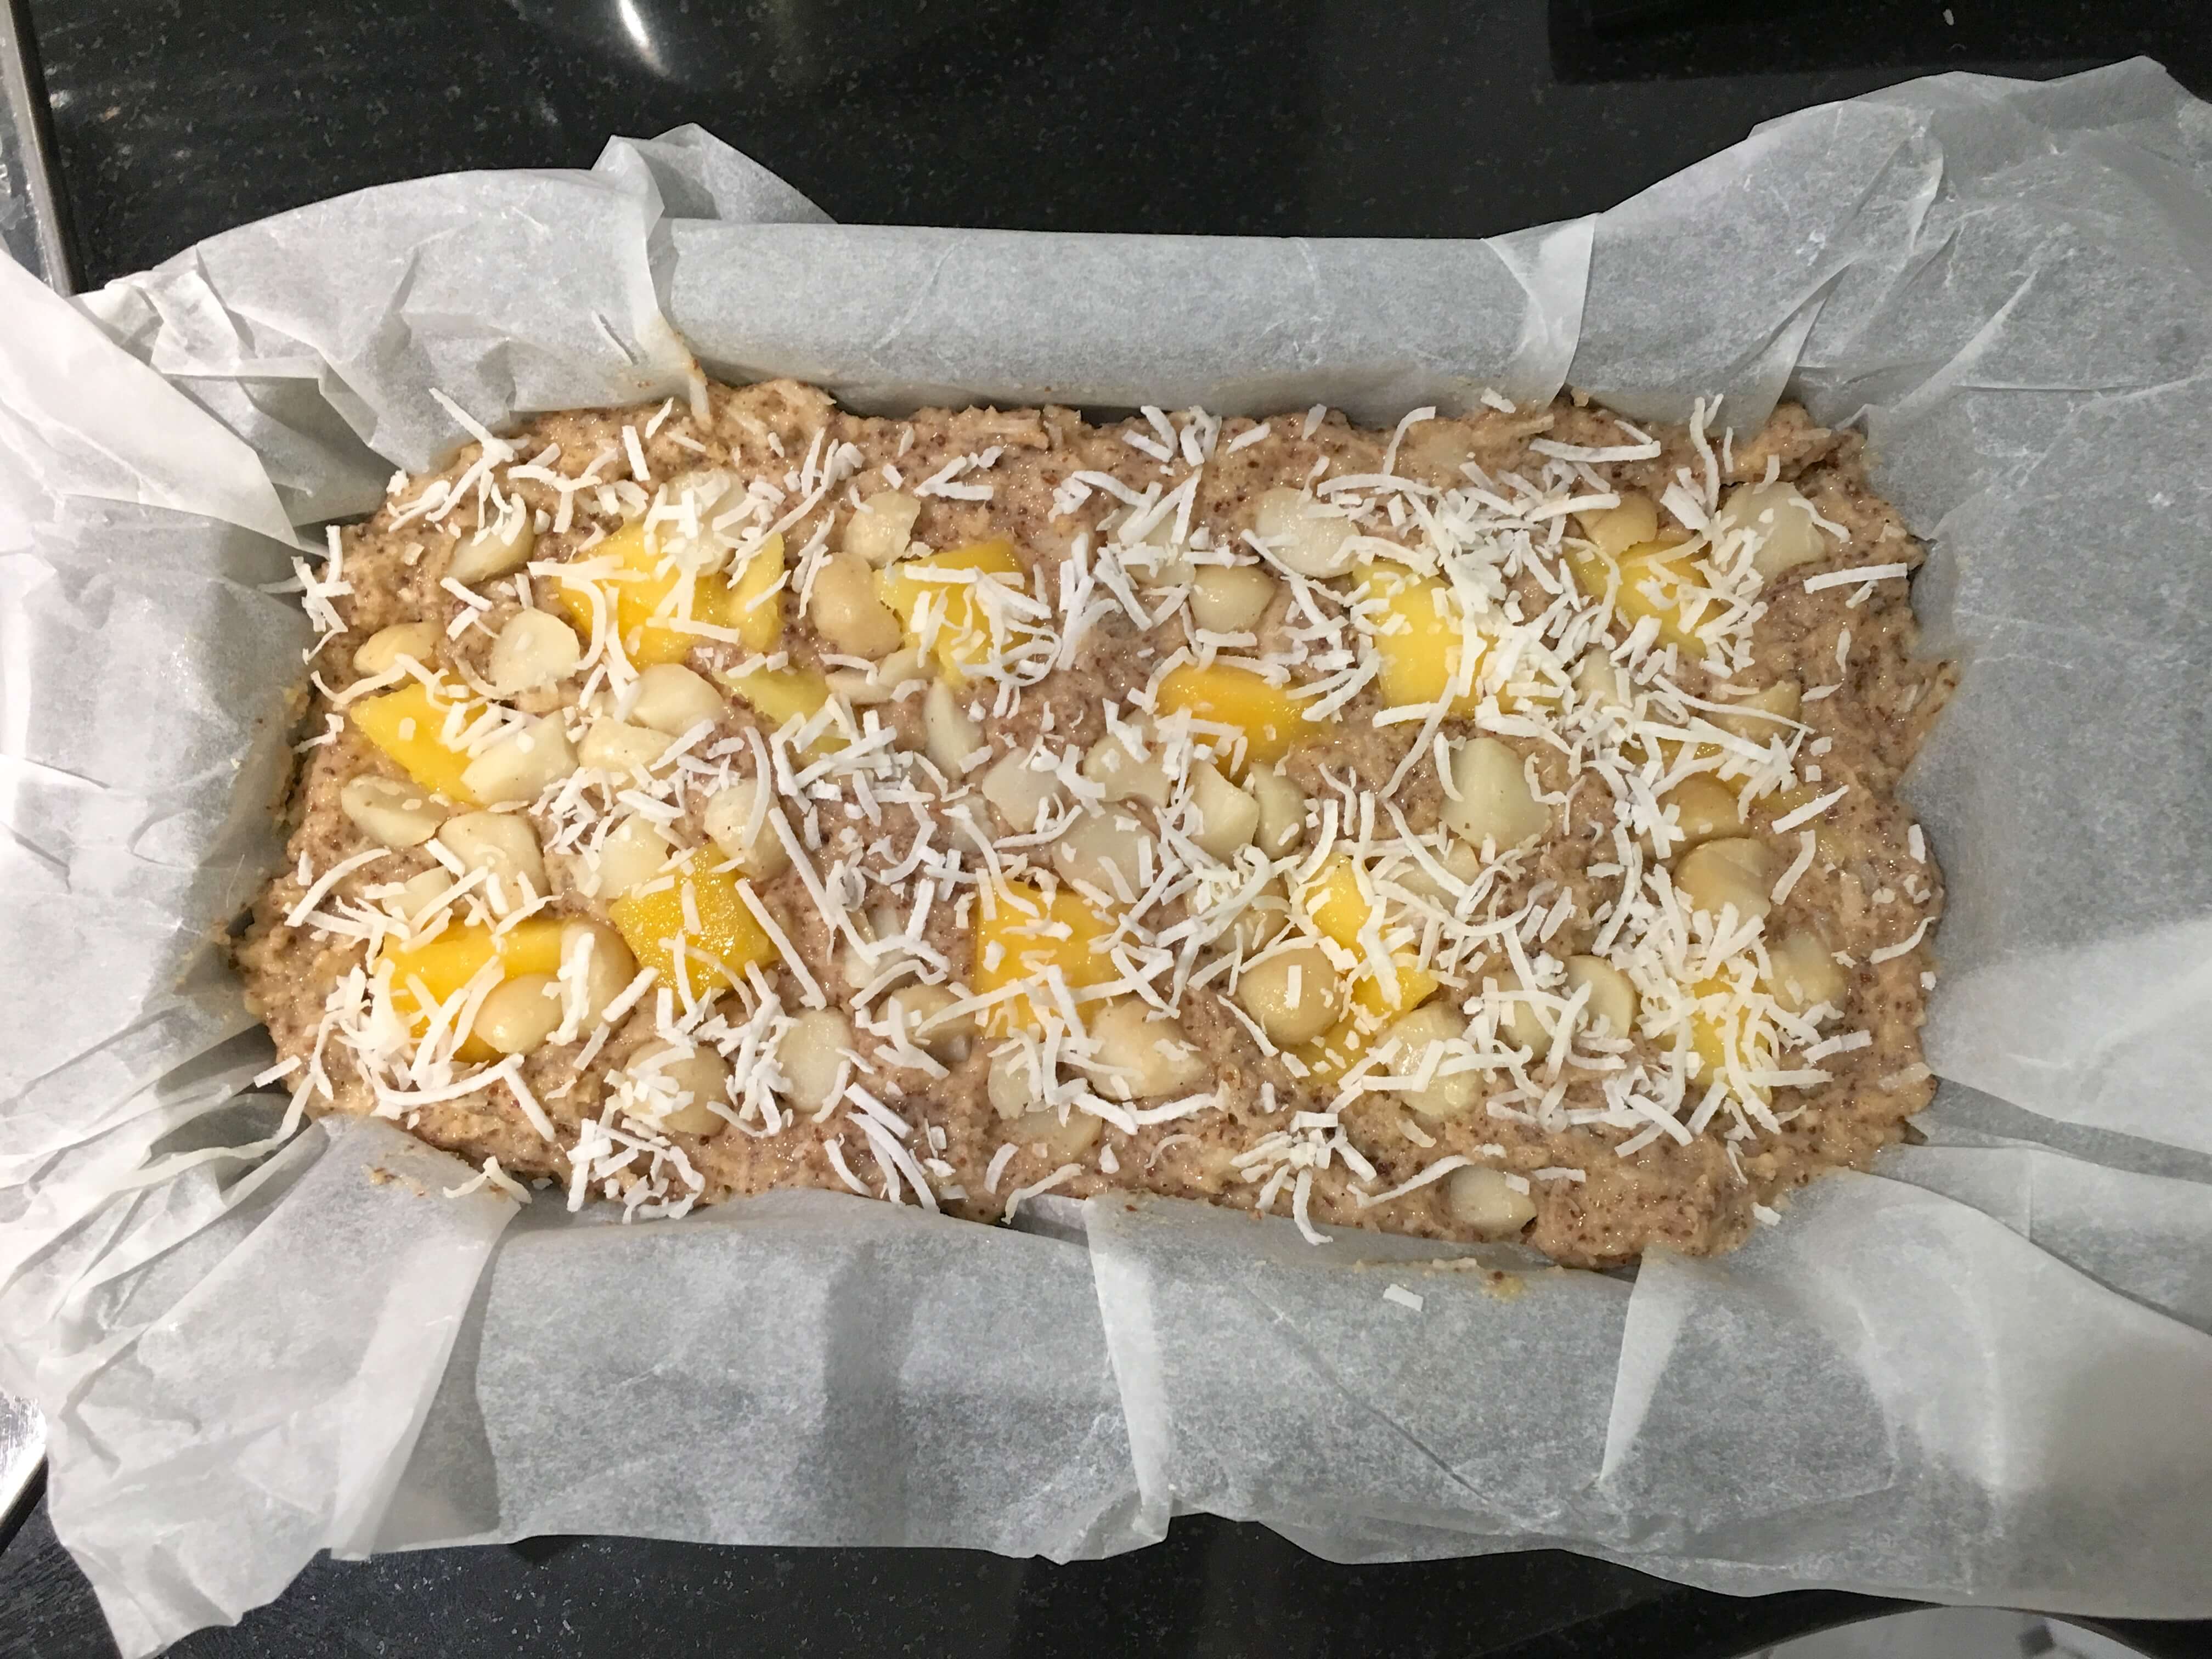 This delicious mango macadamia loaf is made with healthy, all natural ingredients